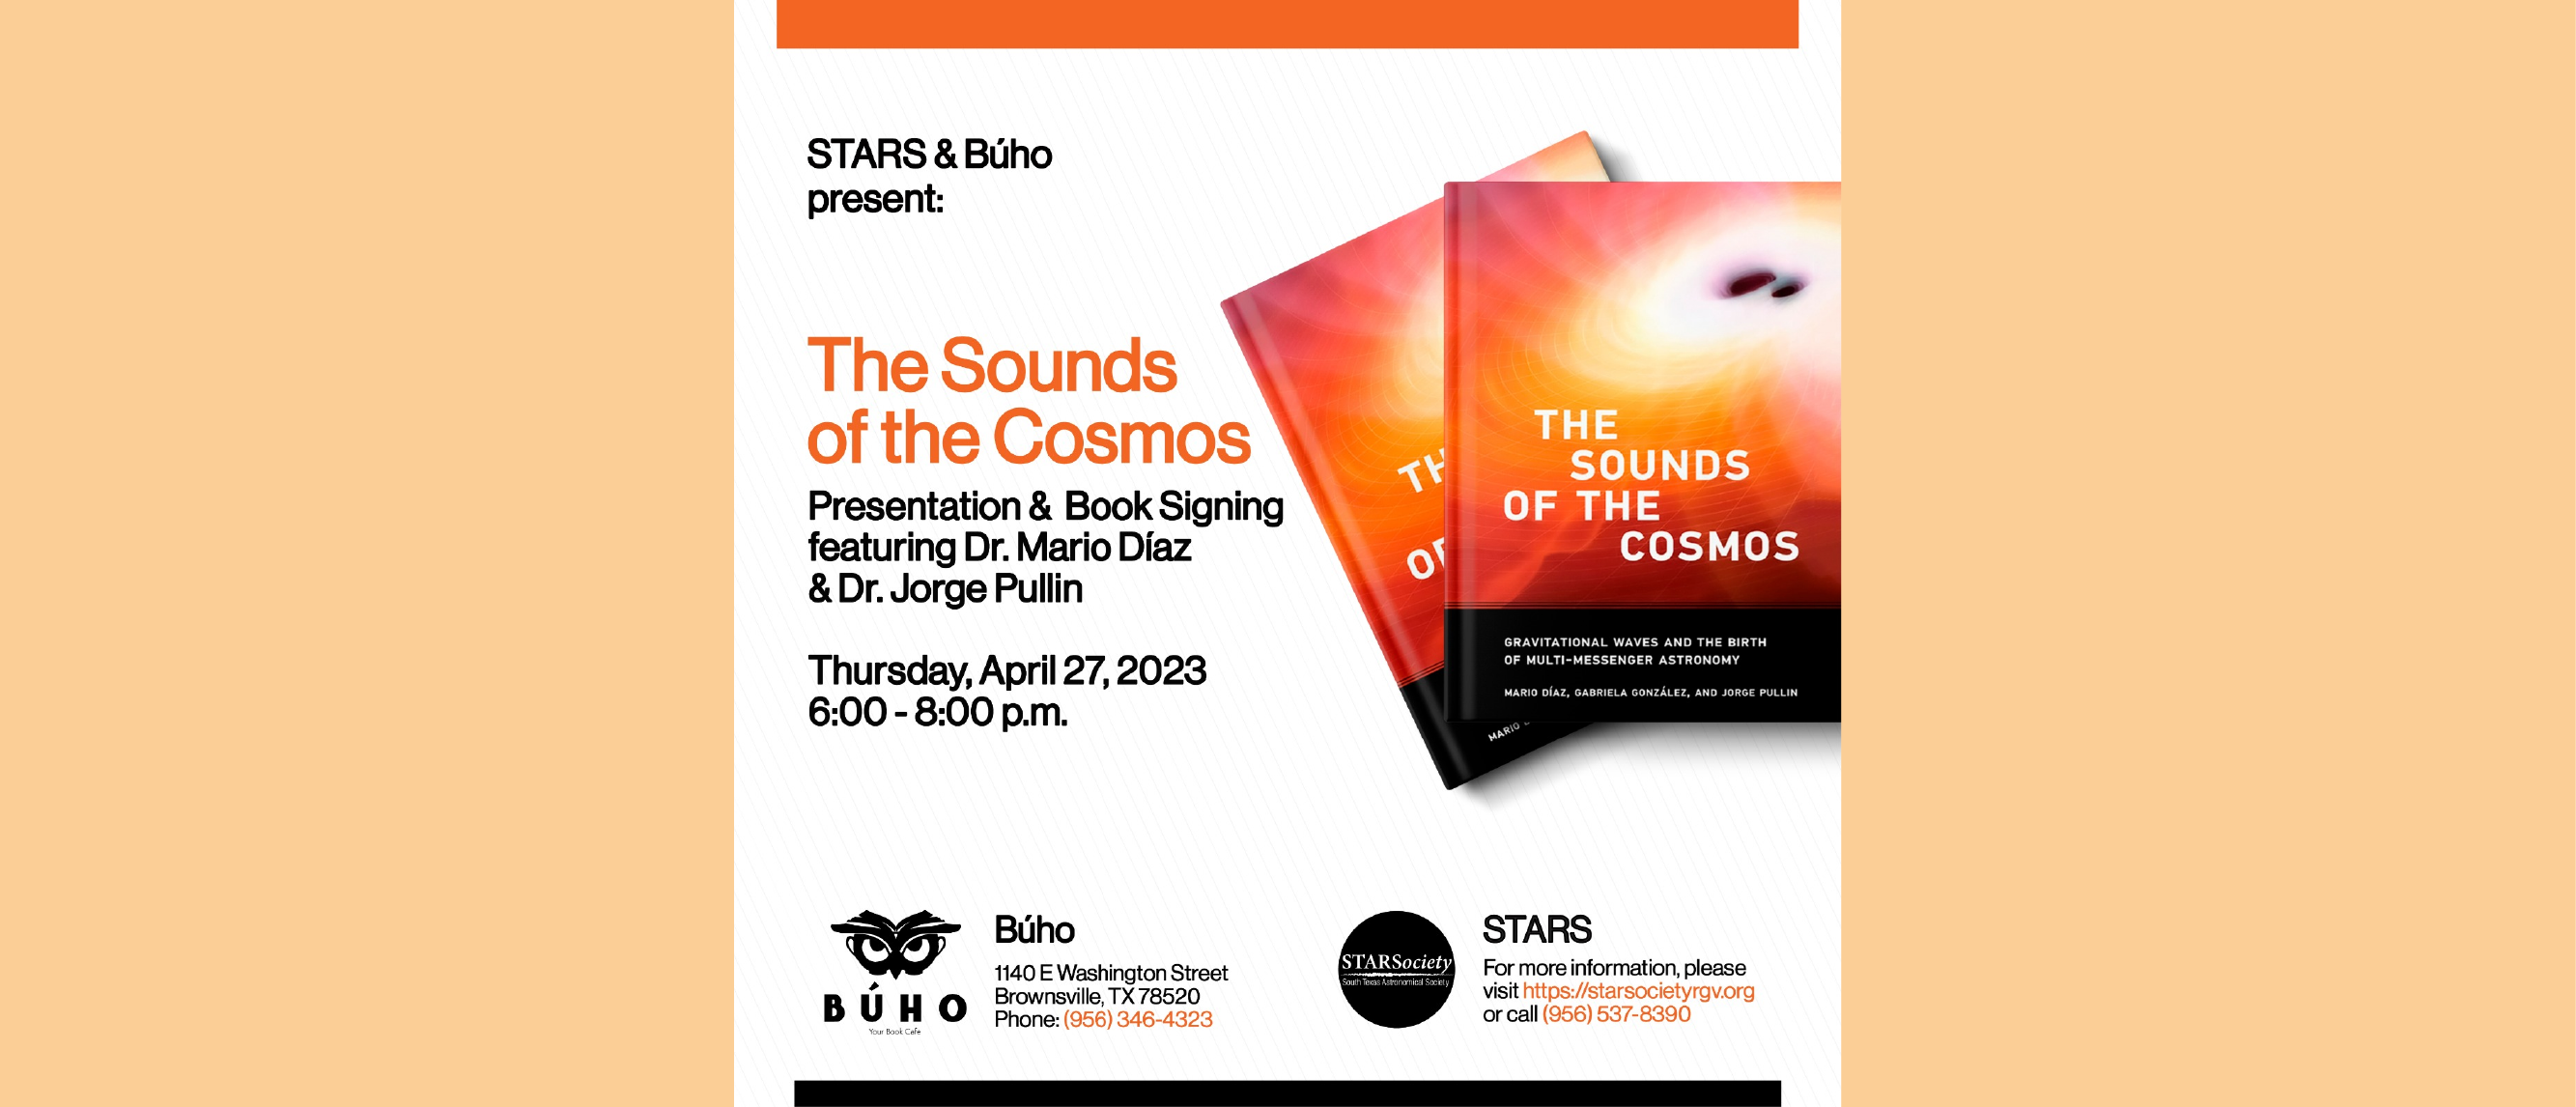 On Thursday April 27 there will be a signing for the book "Sounds of the Cosmos" by Dr. Mario Diaz and Dr. Jorge Pullin.